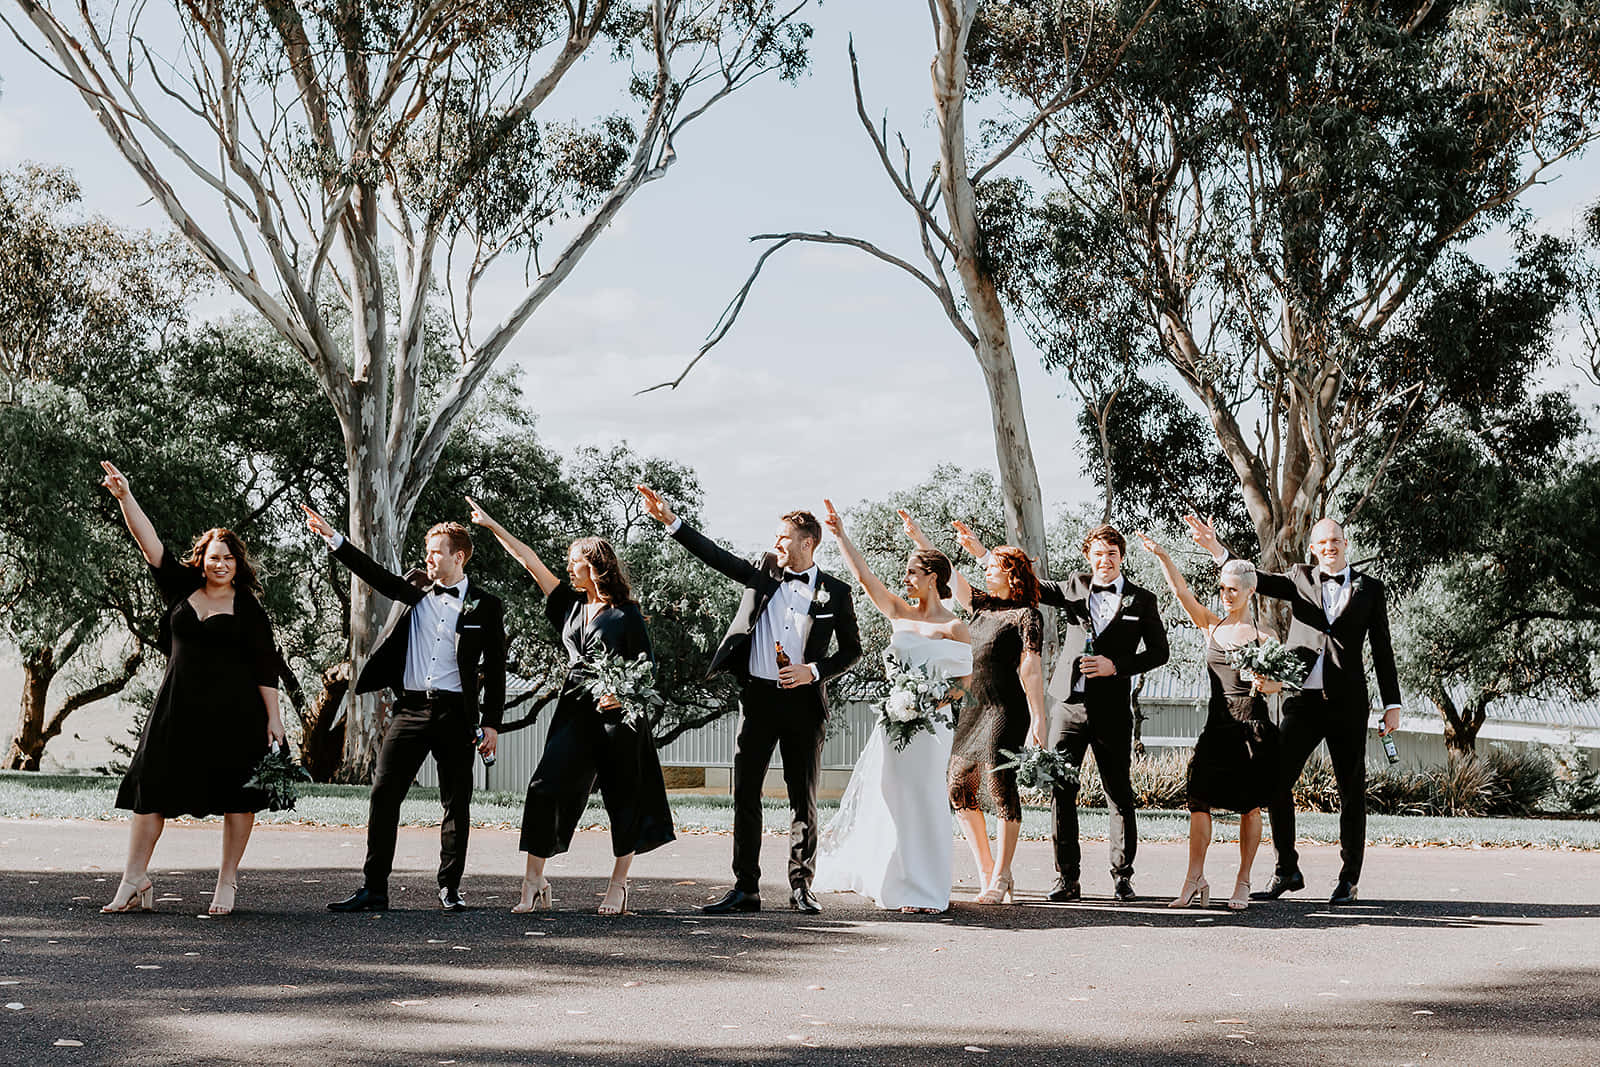 Dancing Bridal Party Pictures